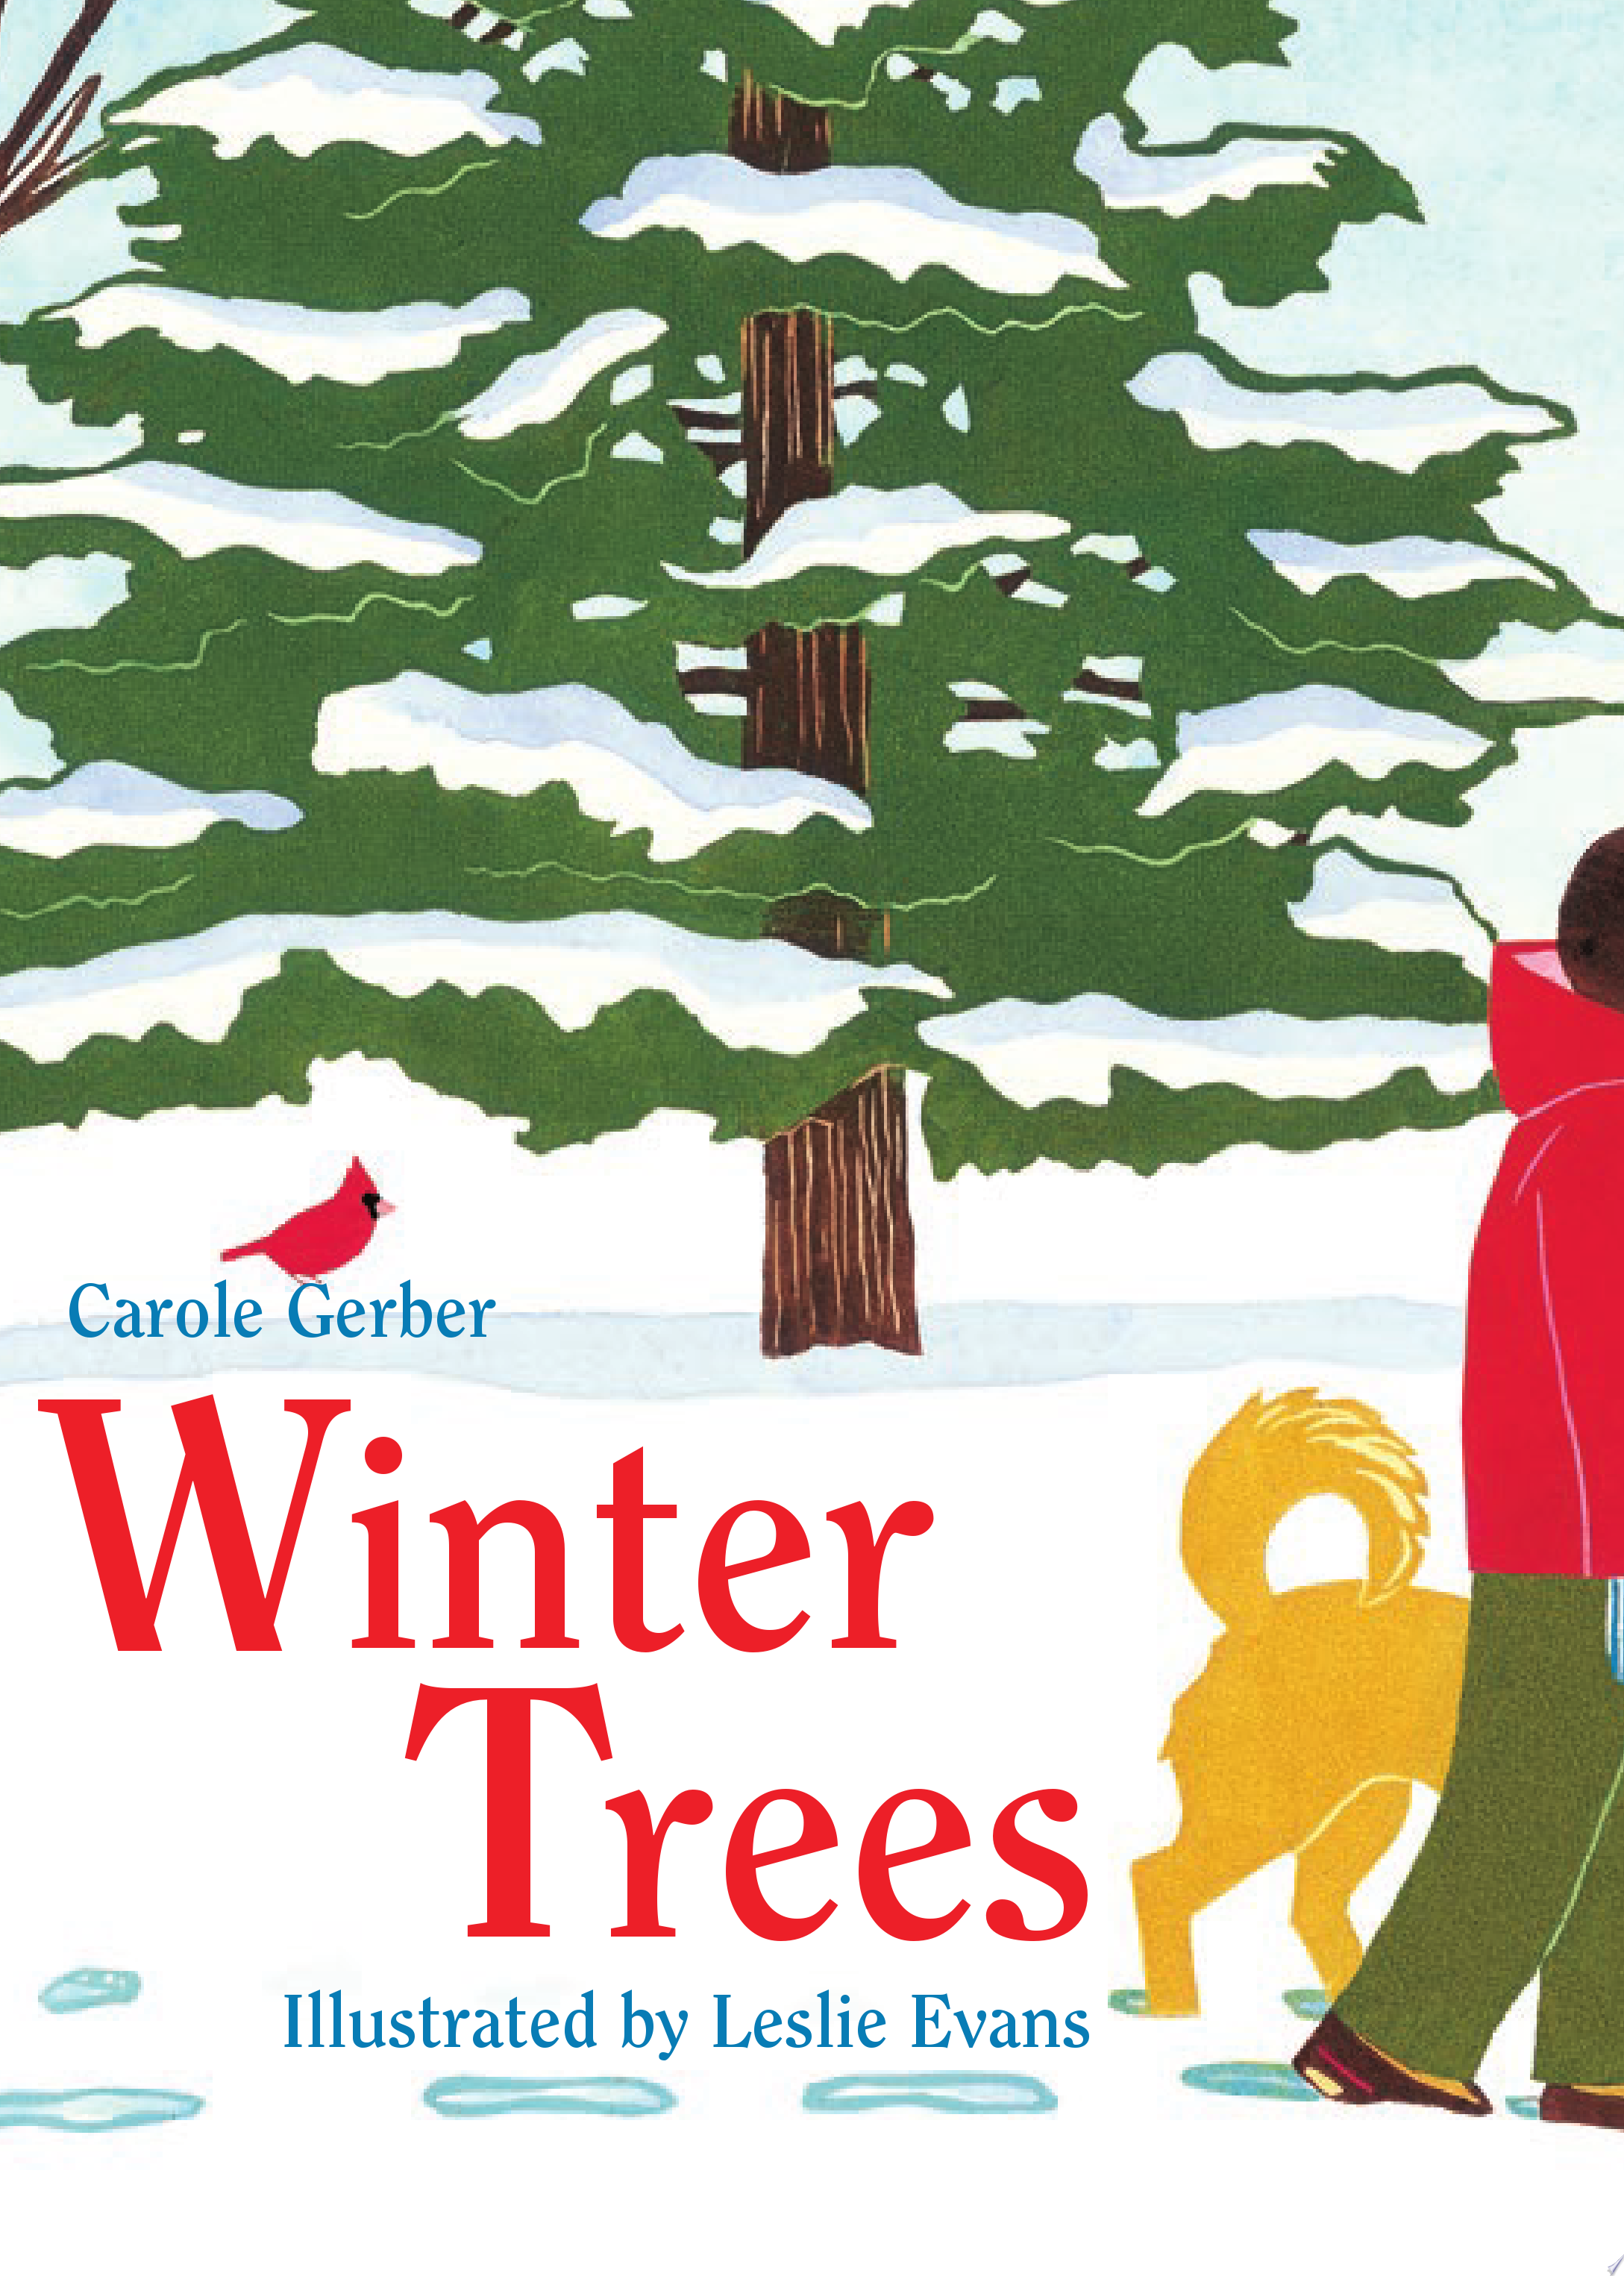 Image for "Winter Trees"